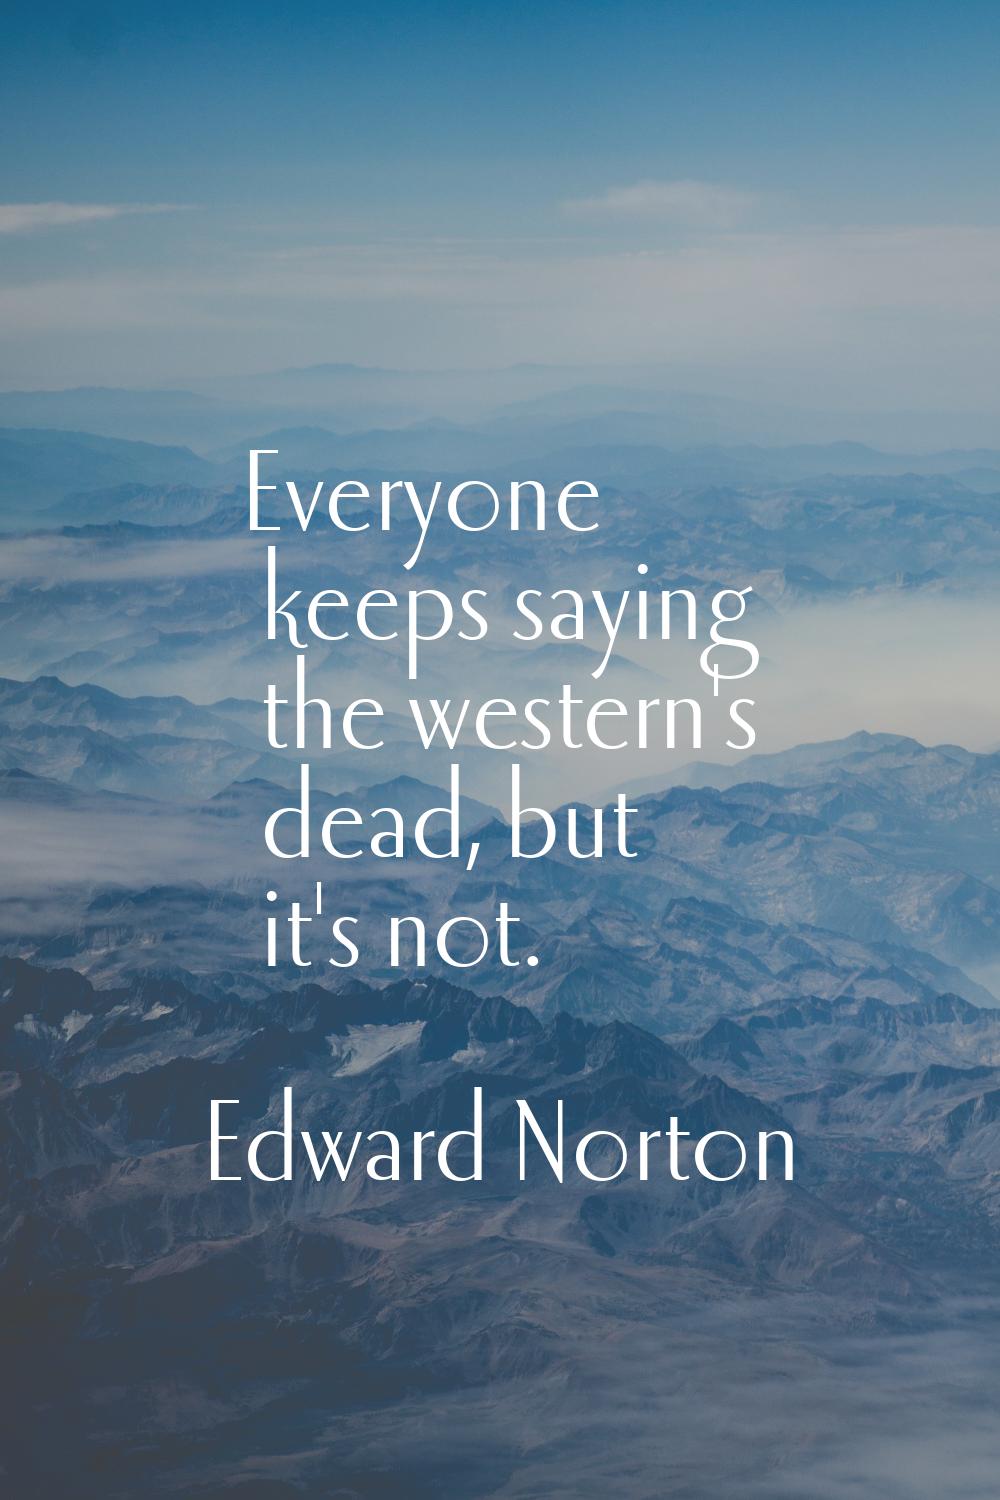 Everyone keeps saying the western's dead, but it's not.